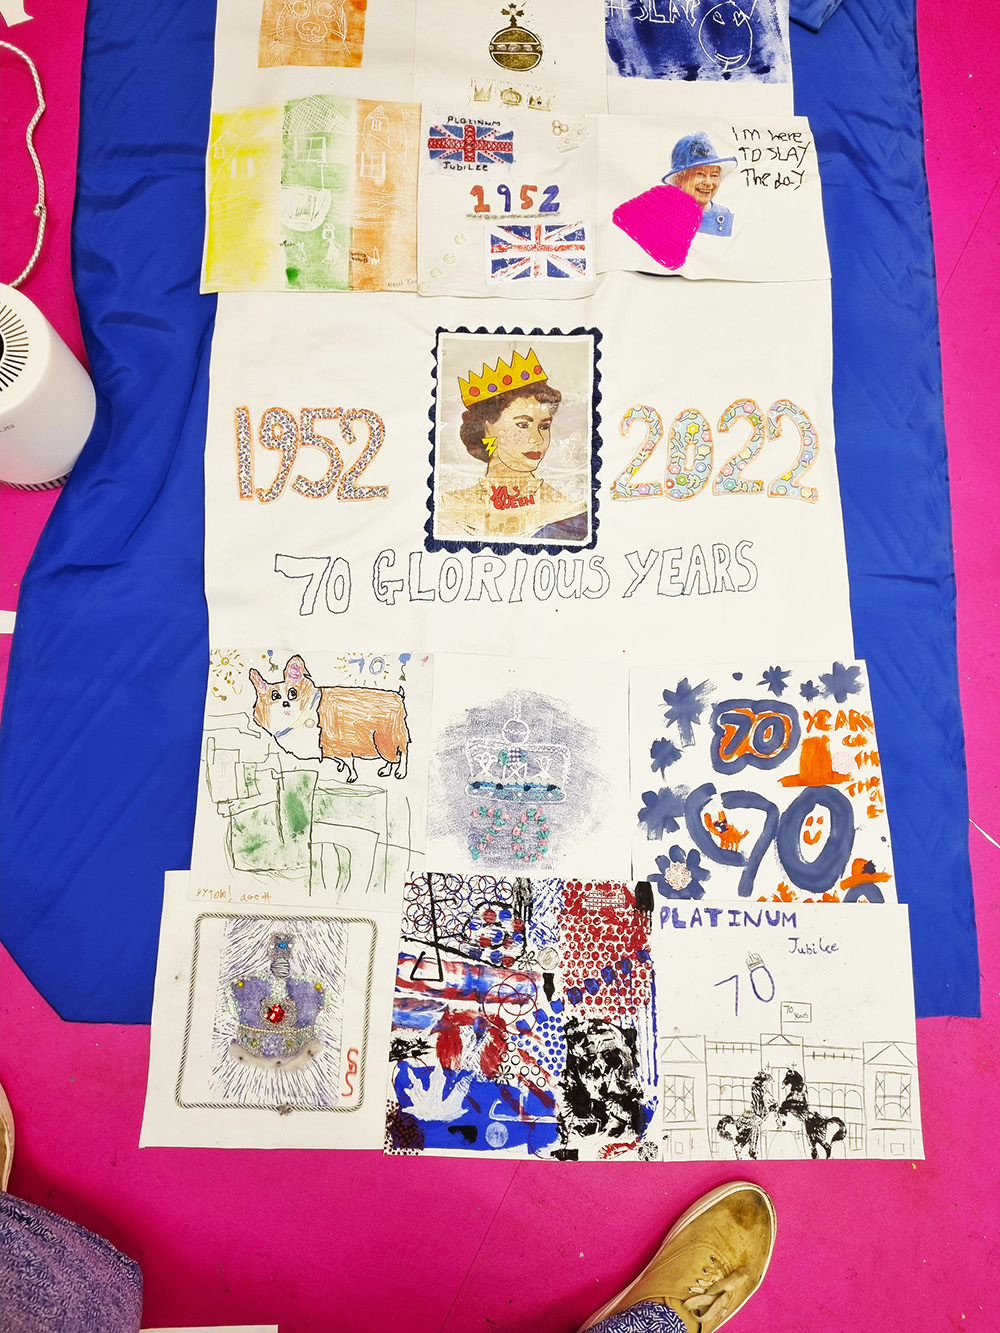 piecing the giant artwork for the Queen's Jubilee together